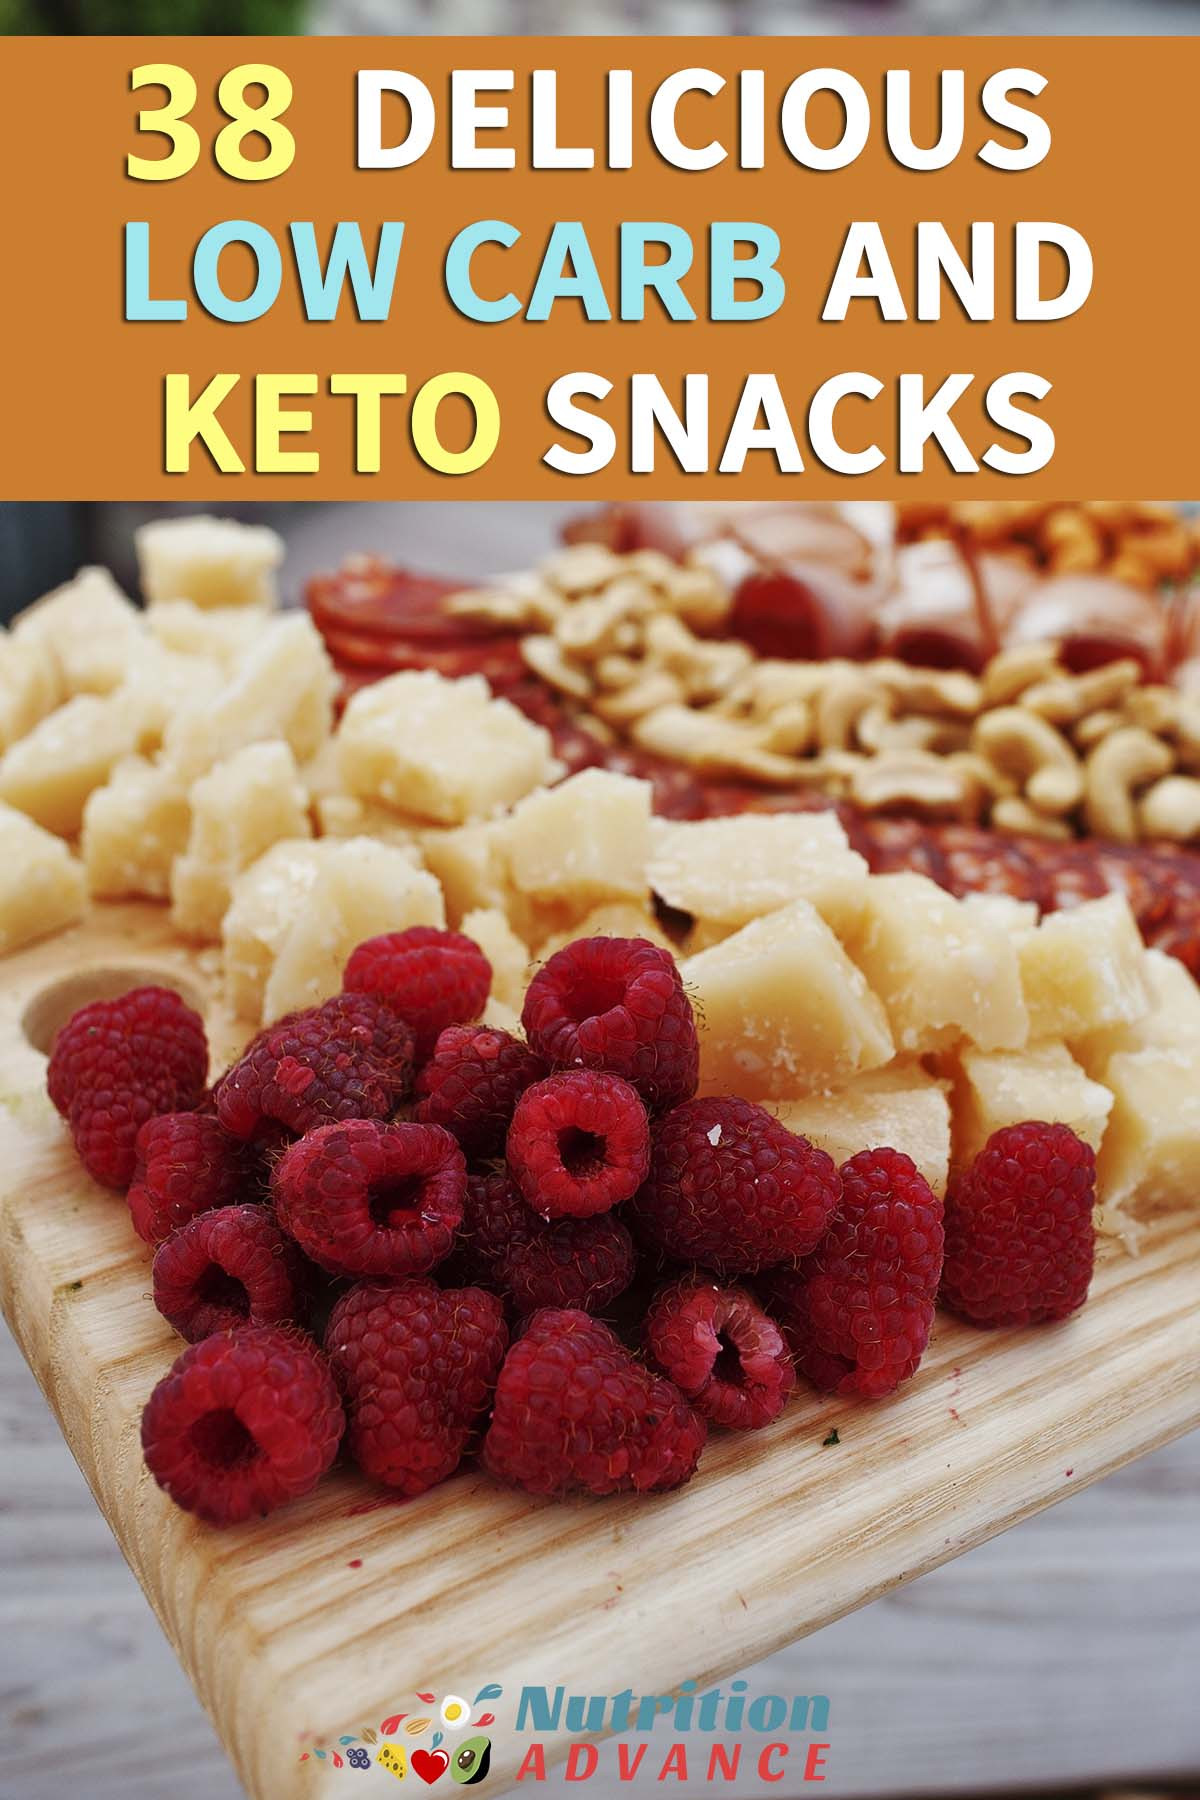 Keto Diet Snacks Low Carb
 38 Delicious Low Carb and Keto Snack Ideas Nutrition Advance